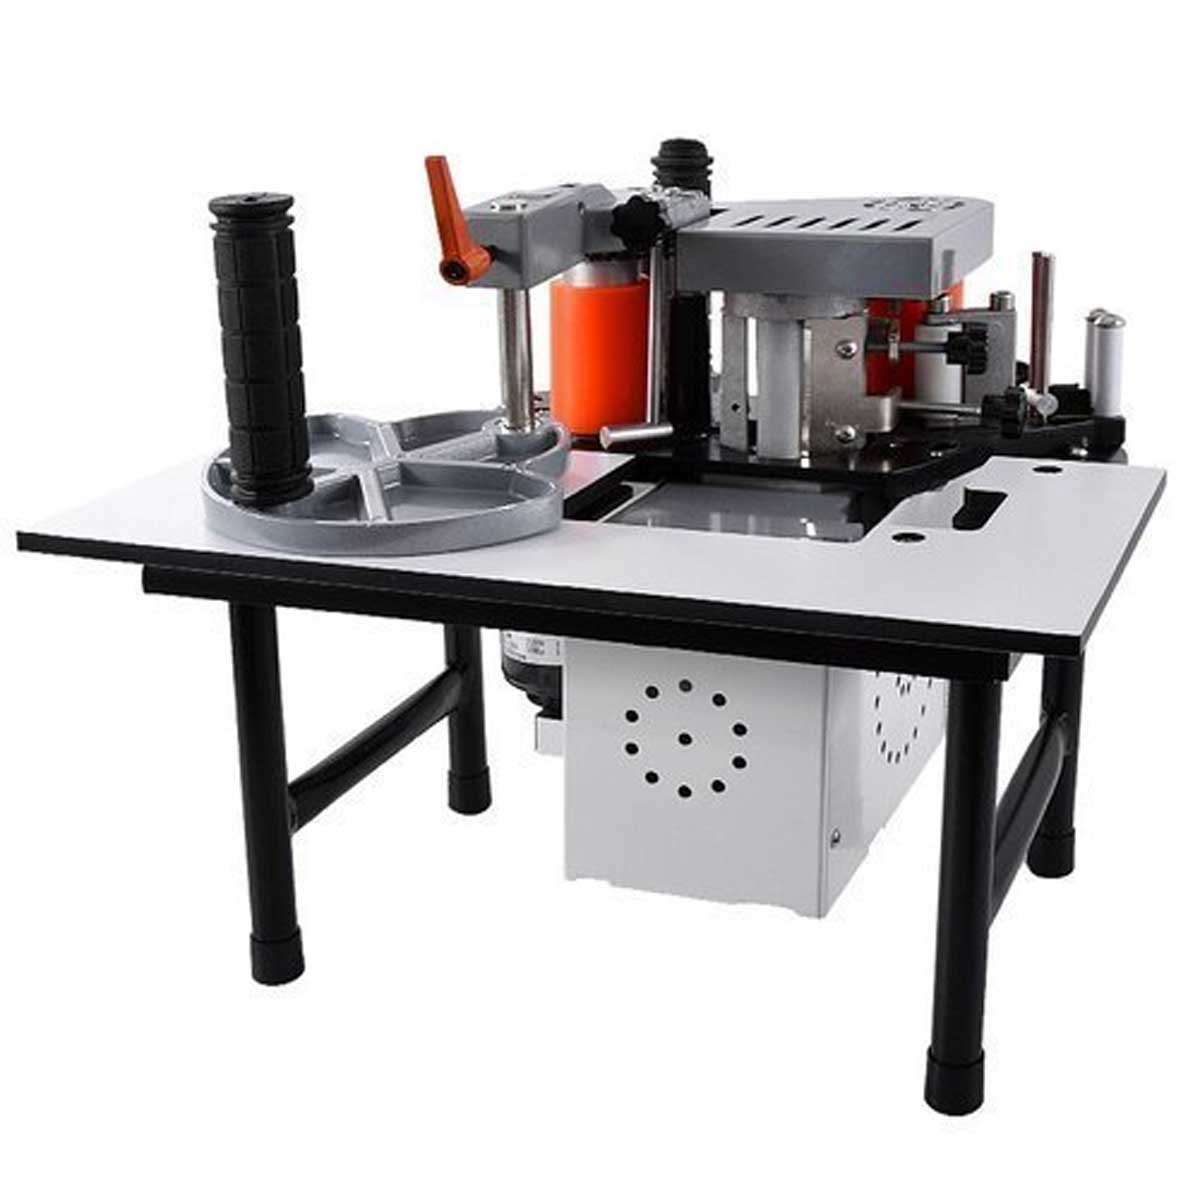 Automatic Wood Edge Band Machine Manufacturers, Suppliers in Delhi